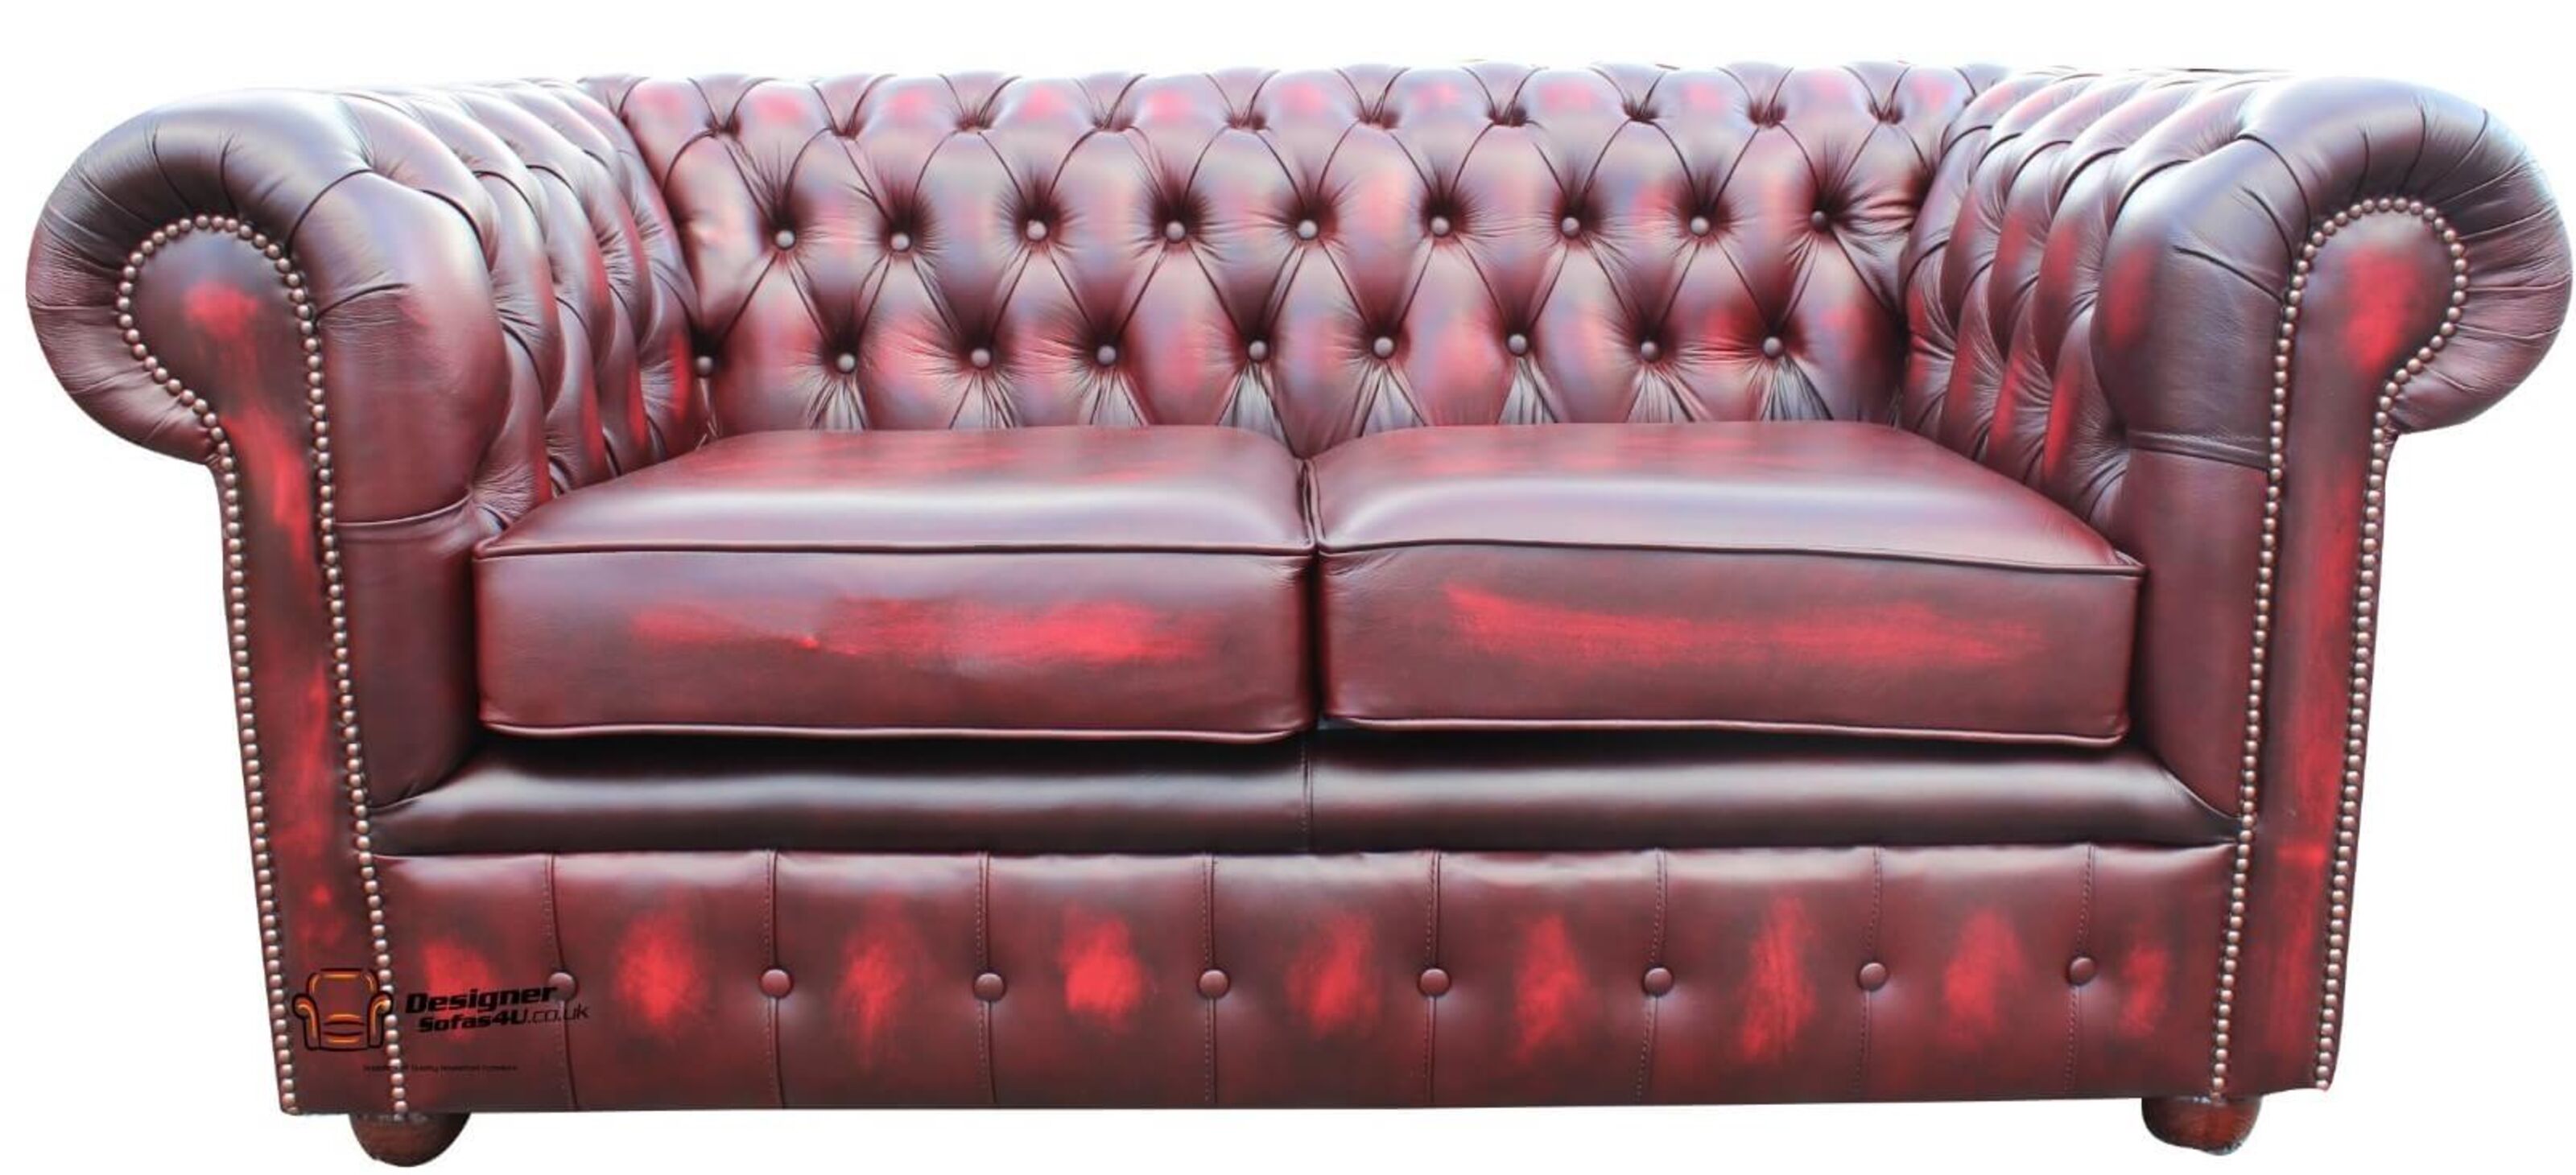 Chesterfield Sofas Born and Bred in the Heart of Tradition  %Post Title